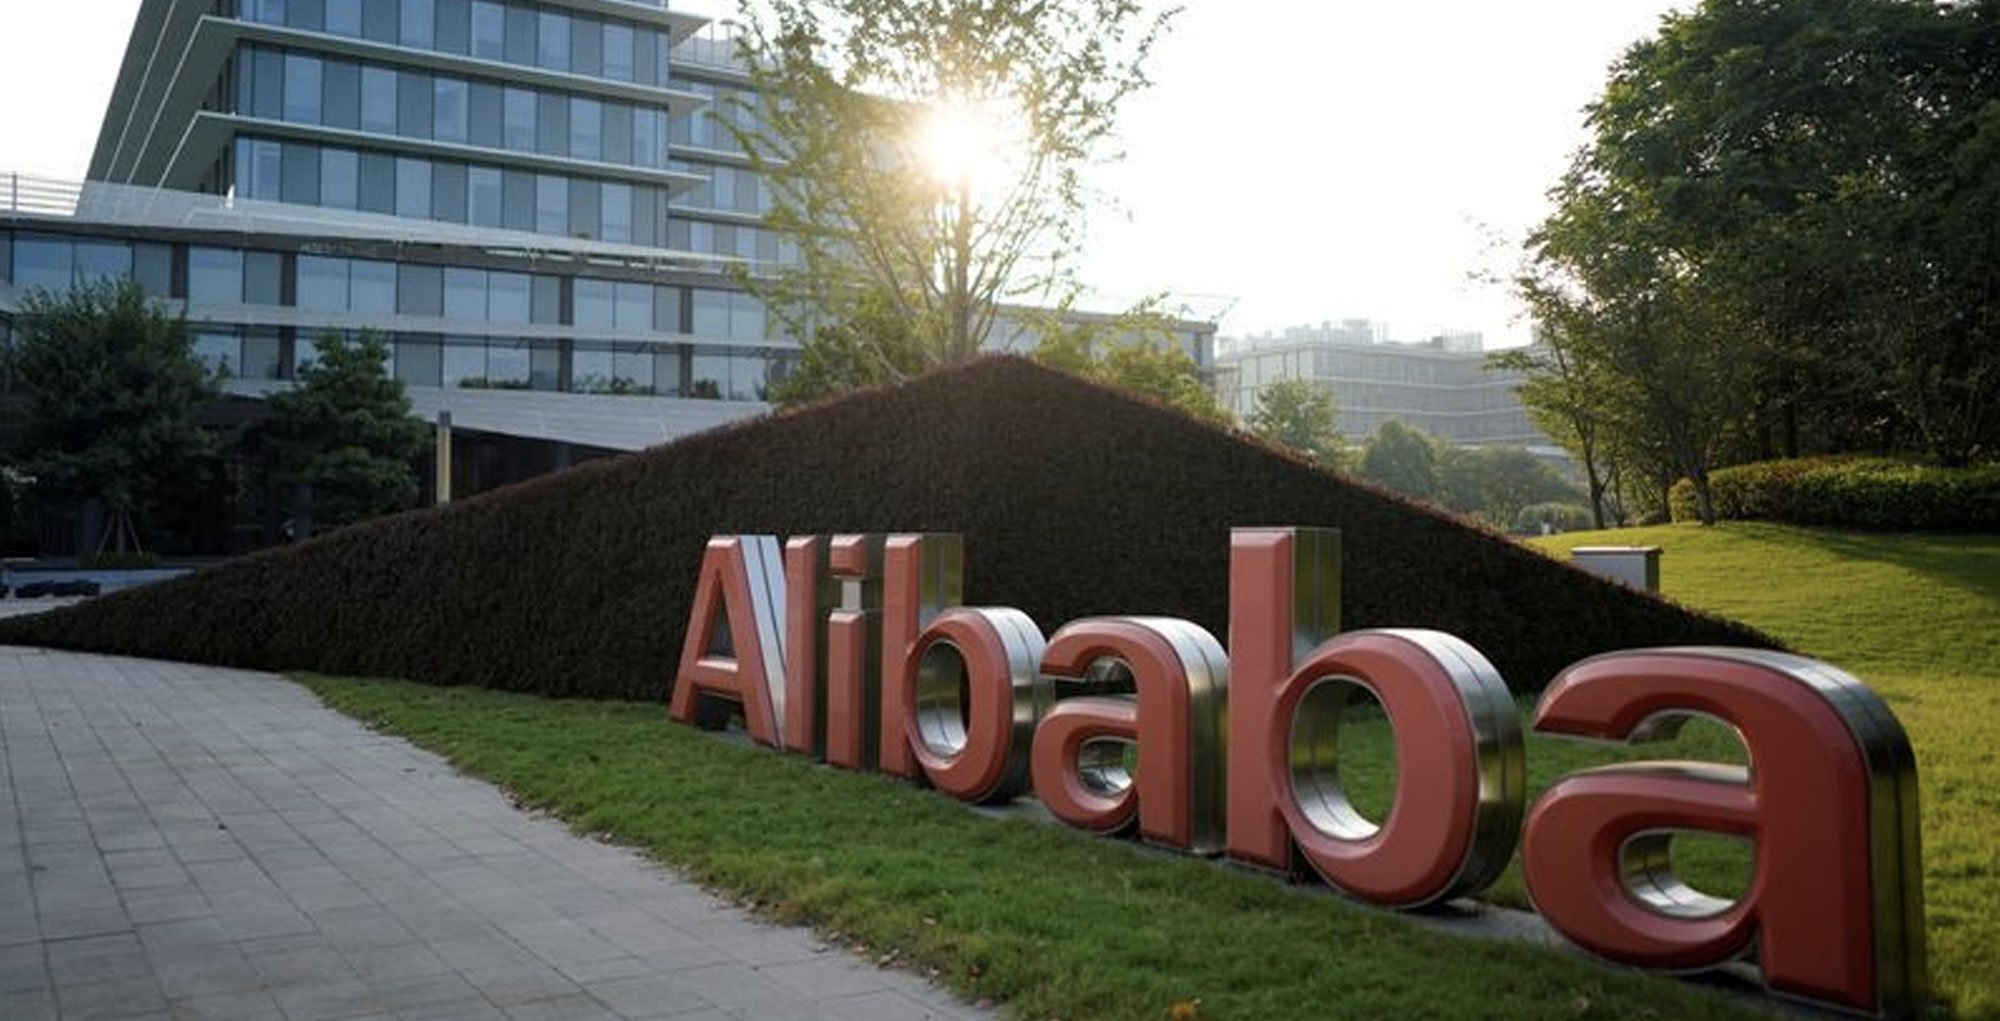 get_the_best_Alibaba Group Stock_ad